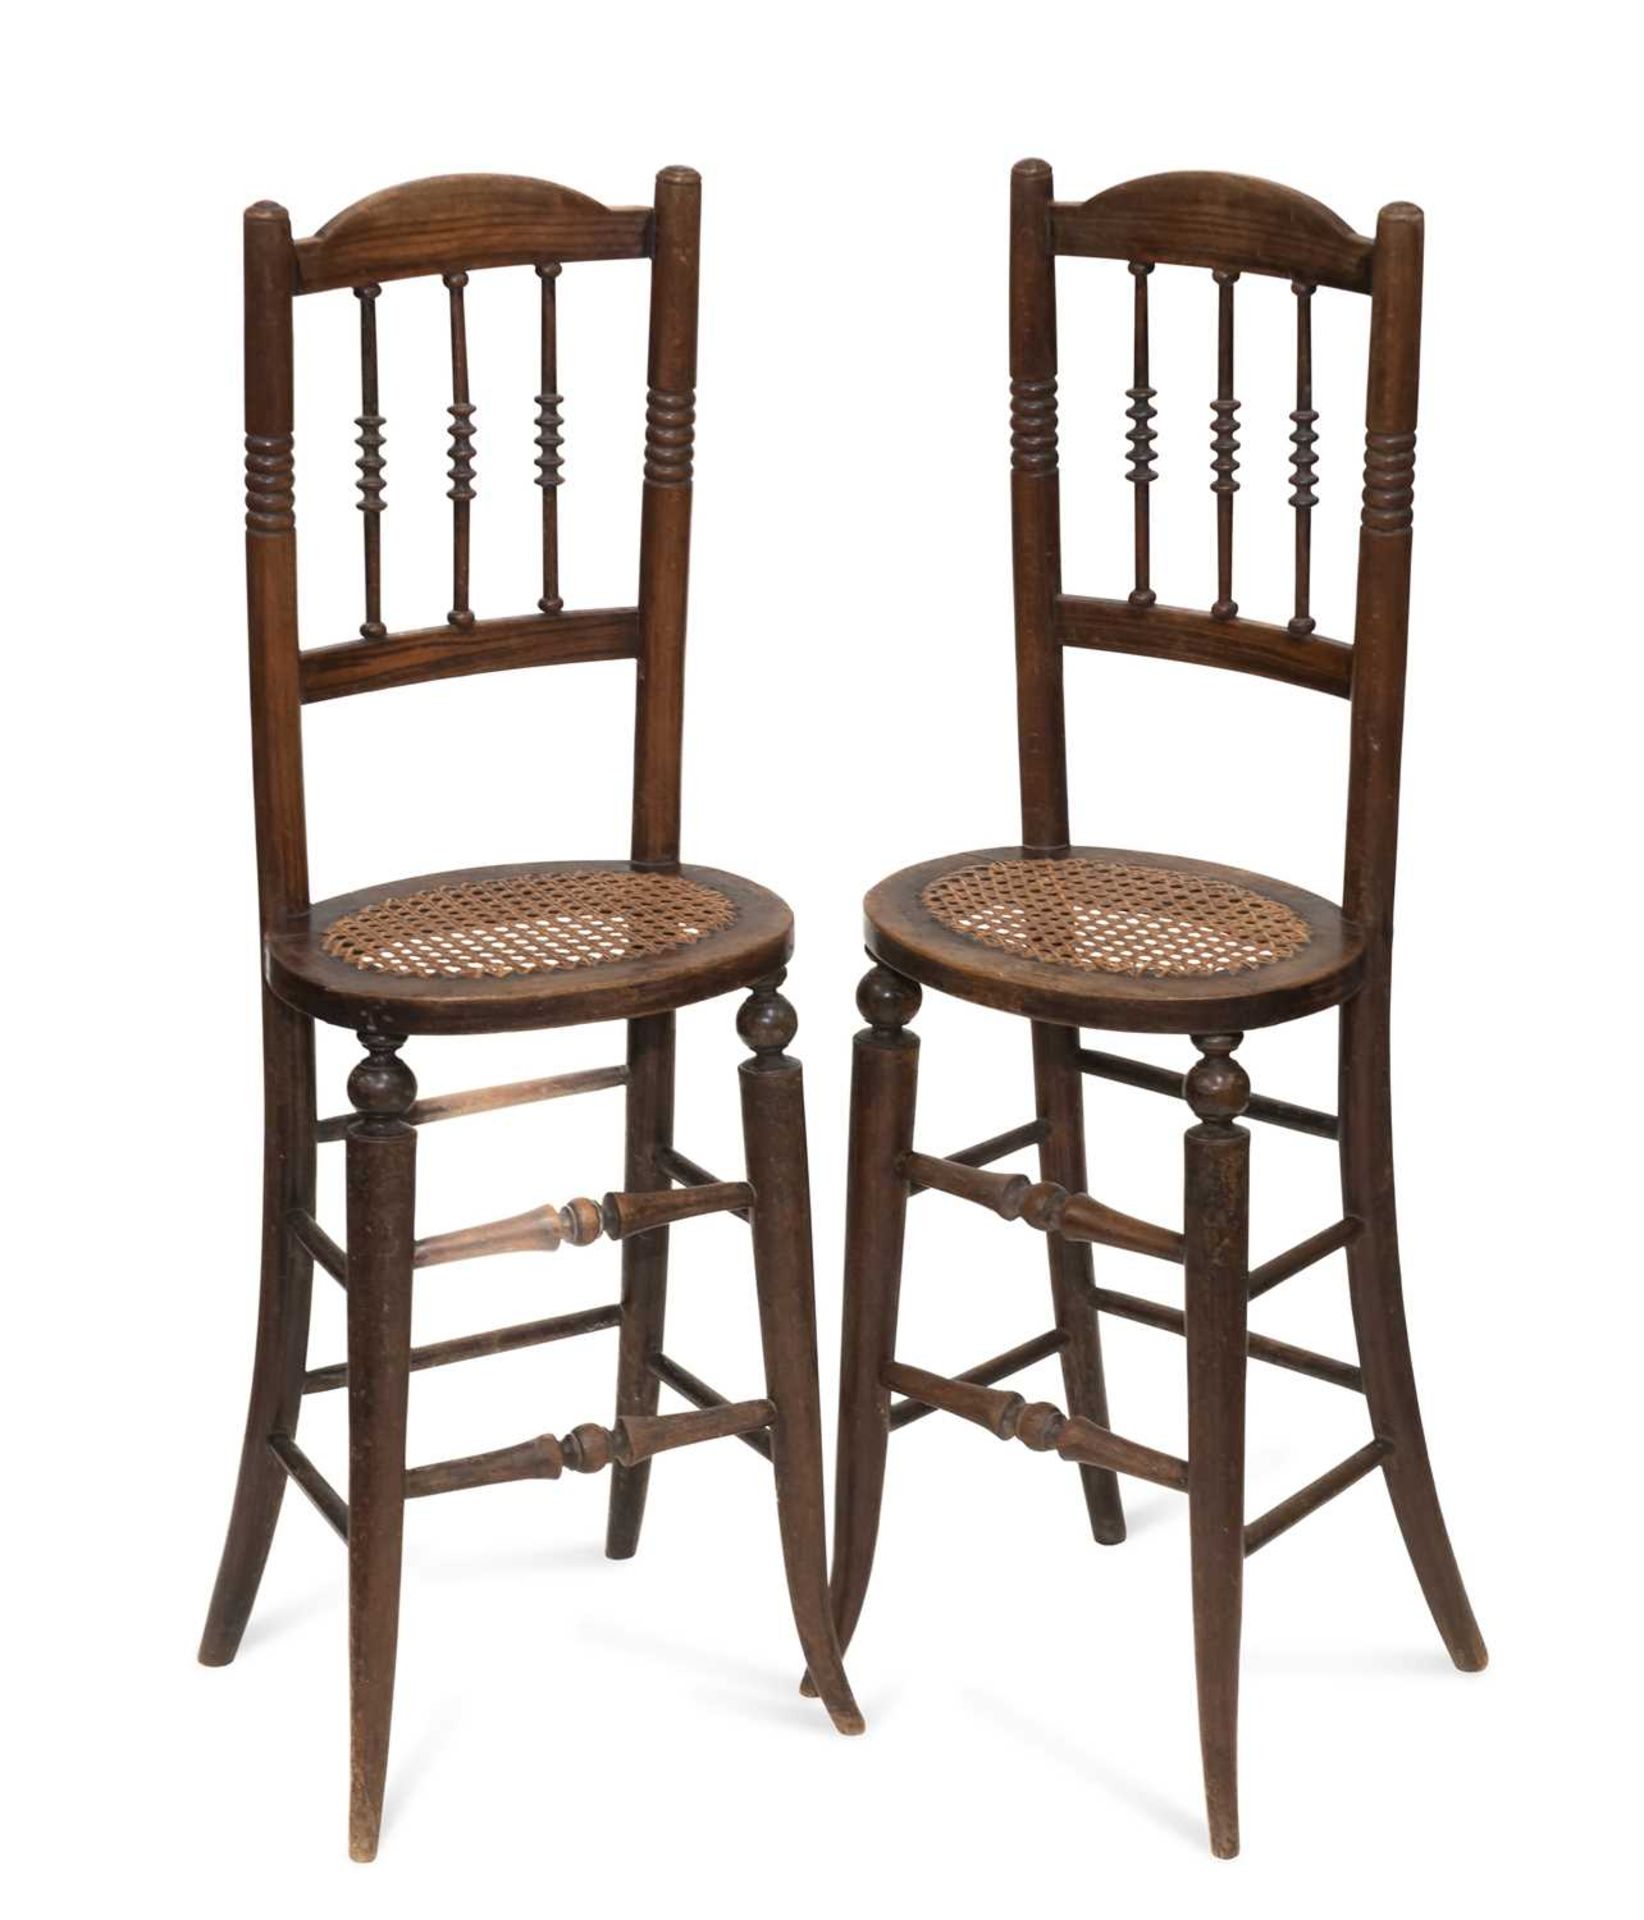 A PAIR OF 19TH CENTURY FAUX ROSEWOOD AND CANEWORK CORRECTION CHAIRS